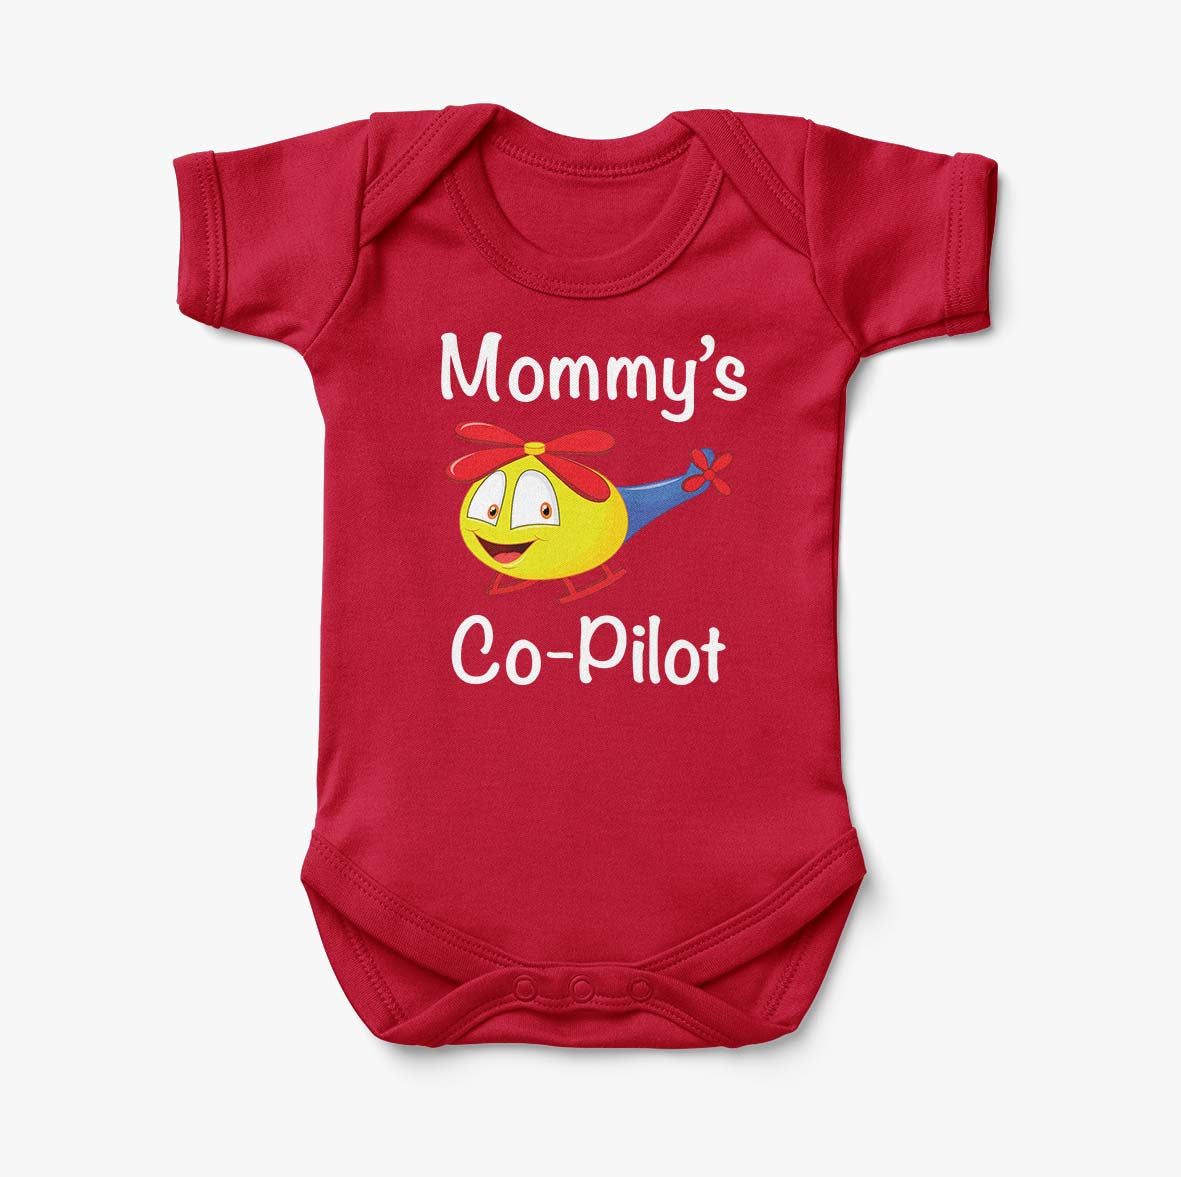 Mommy's Co-Pilot (Helicopter) Designed Baby Bodysuits